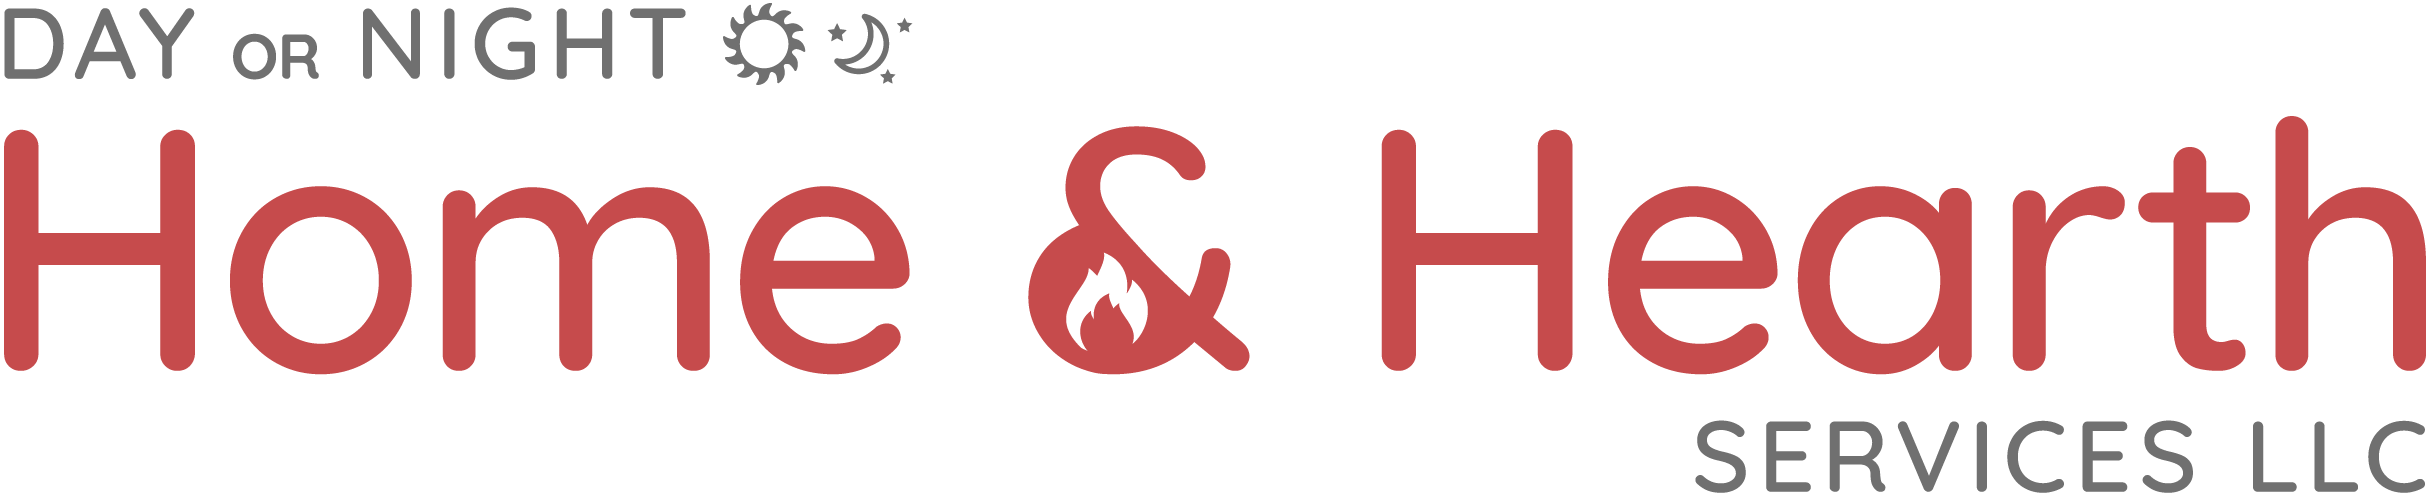 Day or Night Home & Hearth Services logo